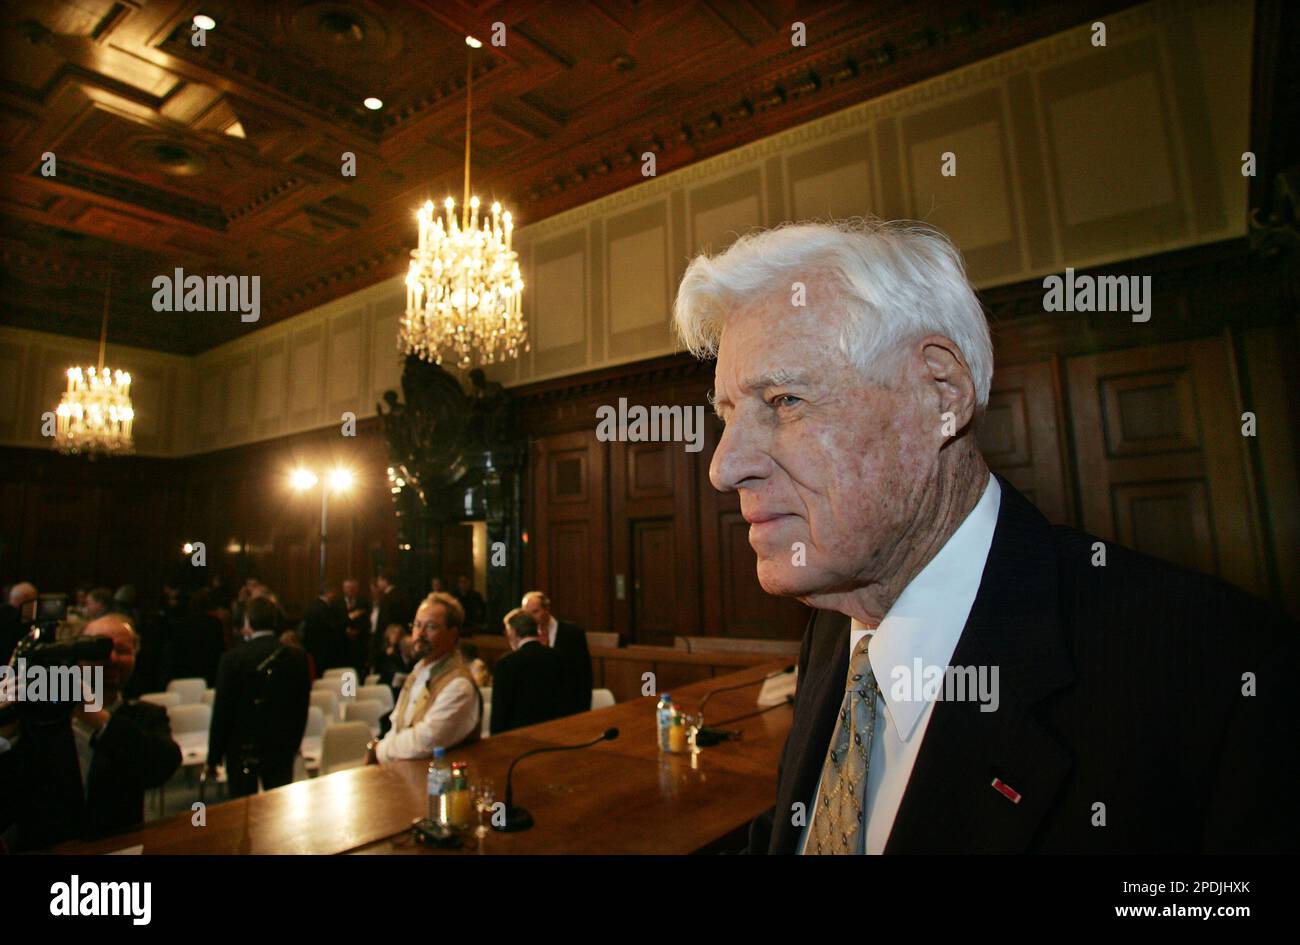 Whitney Harris, former U.S. prosecutor during the Nazi trials, looks around in the historic courtroom in Nuremberg, southern Germany, Sunday, Nov. 20, 2005. A commemoration with witnesses of the time was held on the day of the 60th anniversary of the trial, that sent many Nazi leaders and generals to prison or to the gallows. (AP Photo/Diether Endlicher) Stockfoto